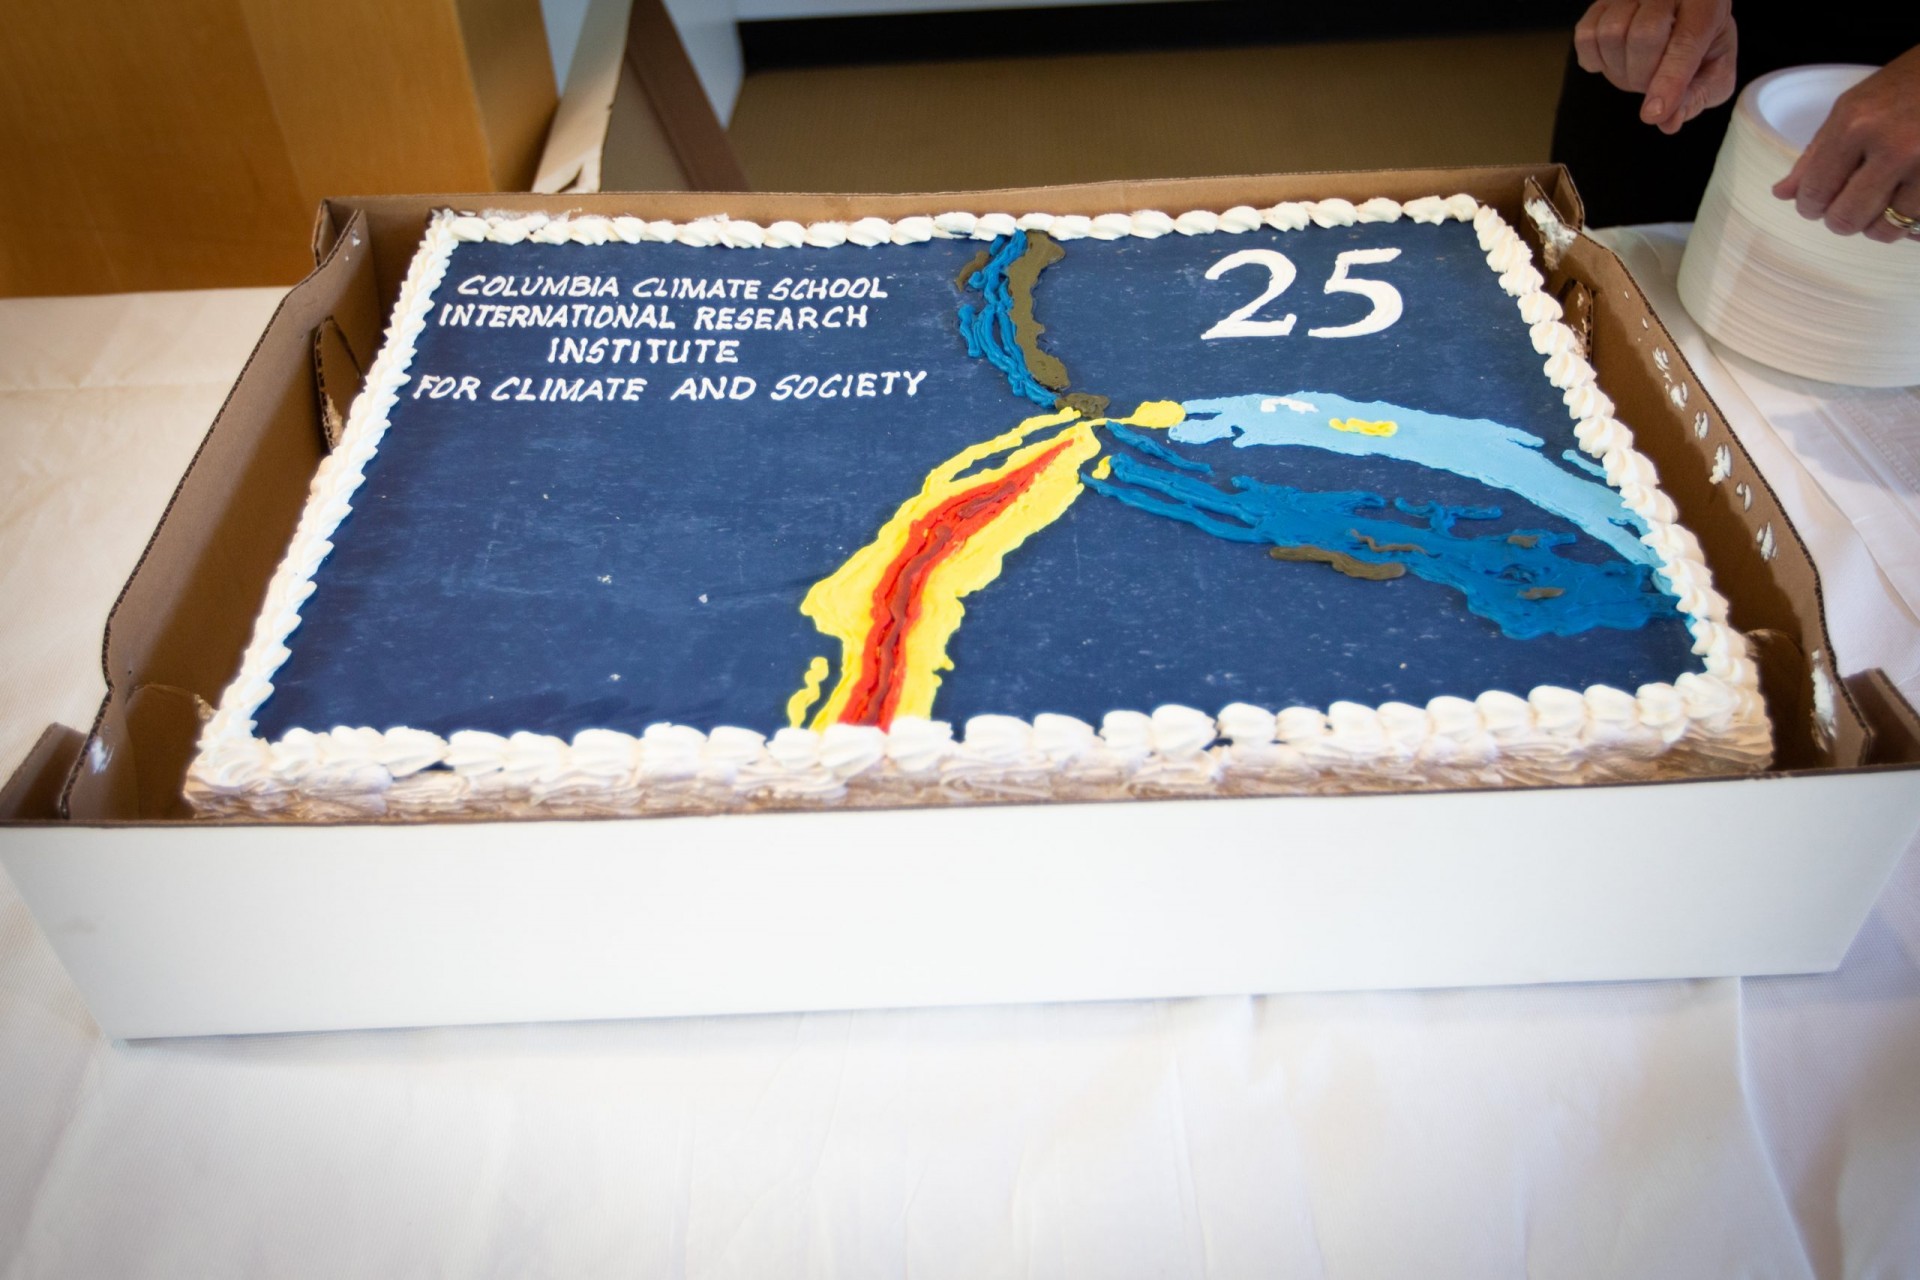 25 years of translating climate science into action